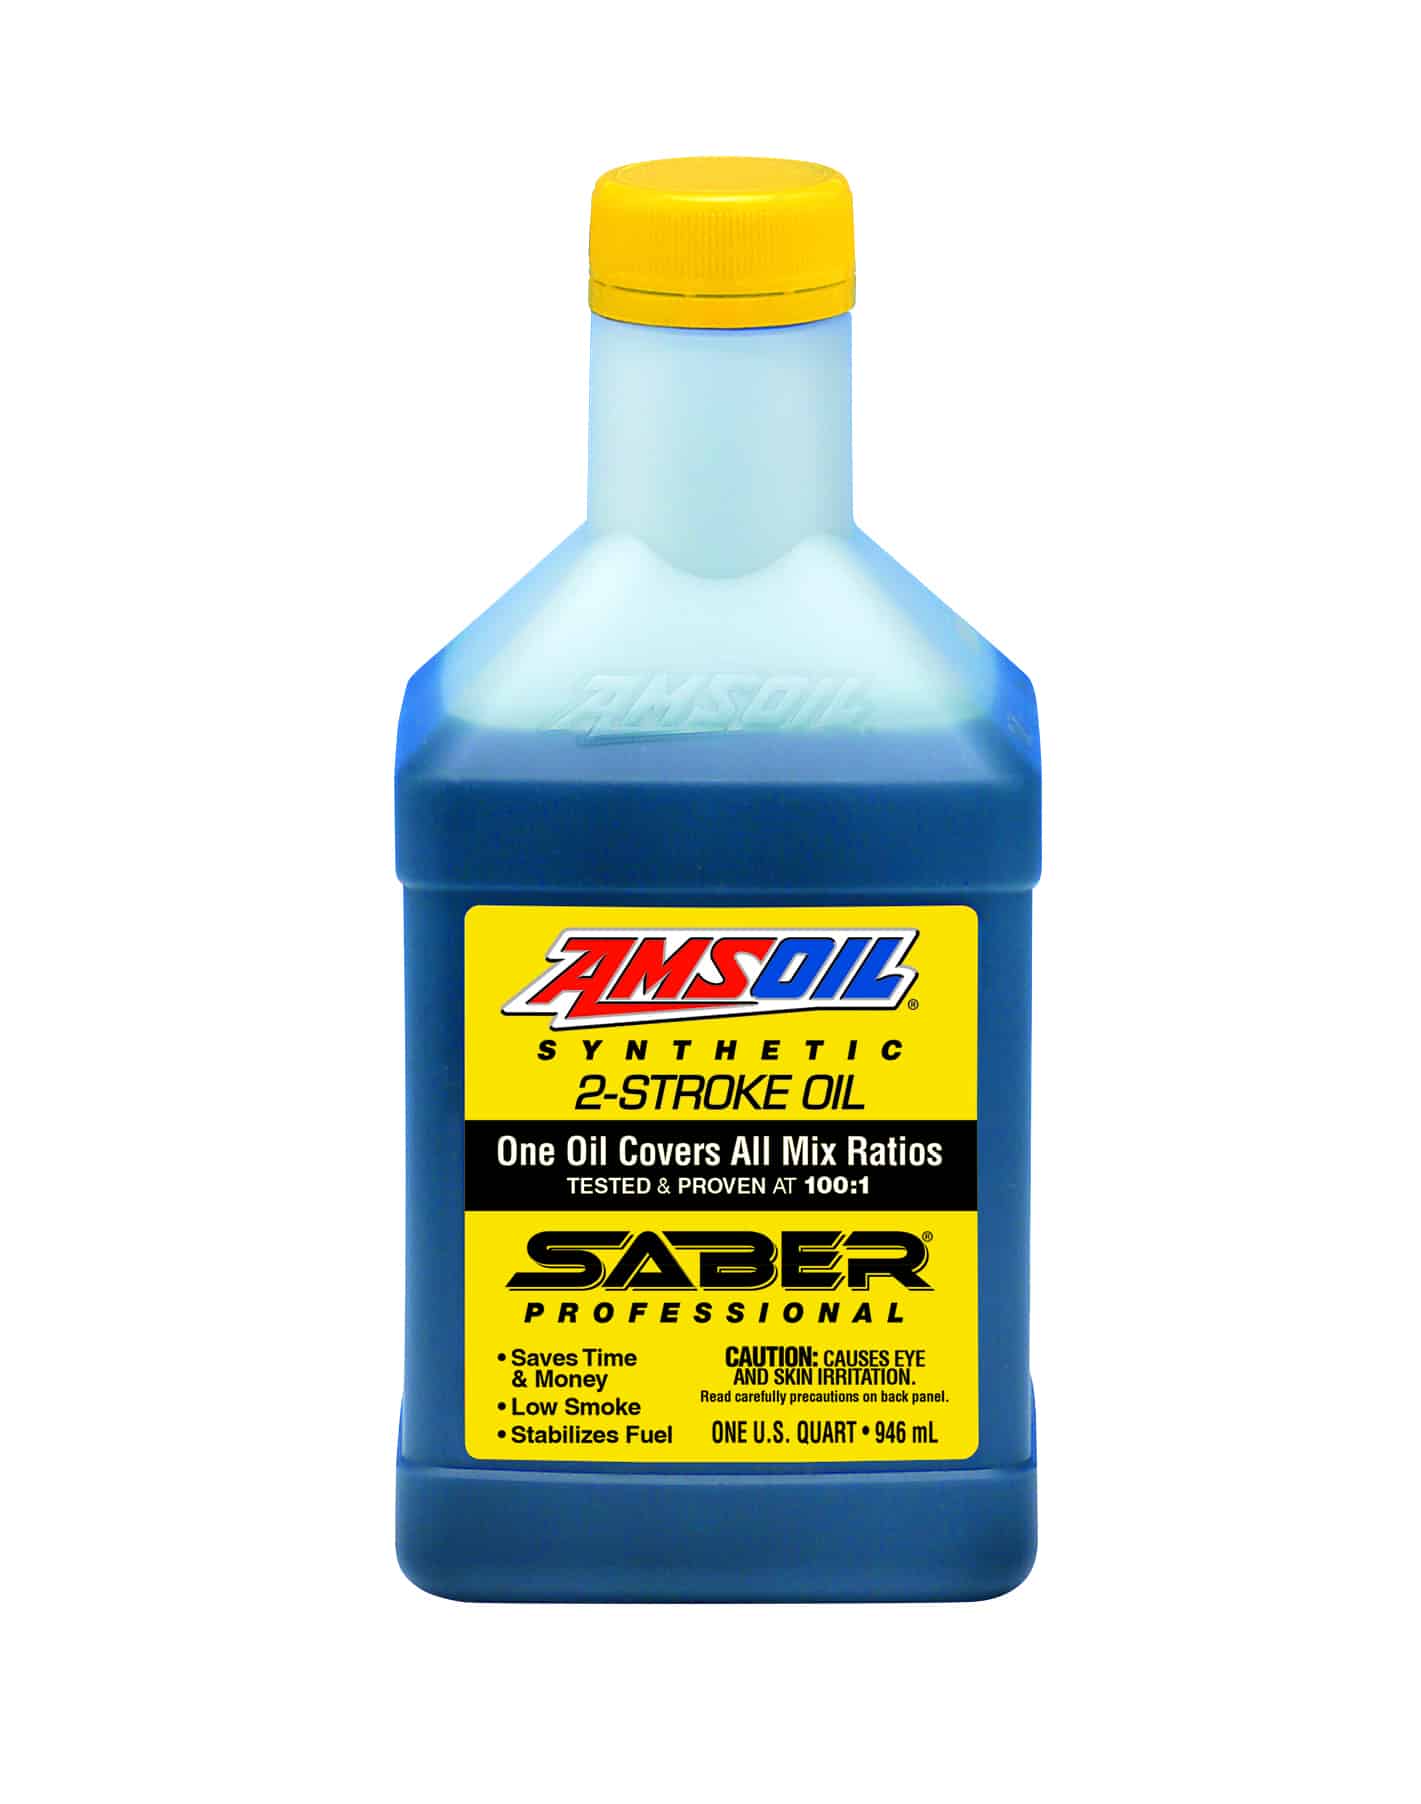 AMSOIL products infomercial: A bottle of AMSOIL SABER® Professional Synthetic 2-Stroke Oil. It does a better job fighting carbon deposits that rob engines of power & reduces their service life.